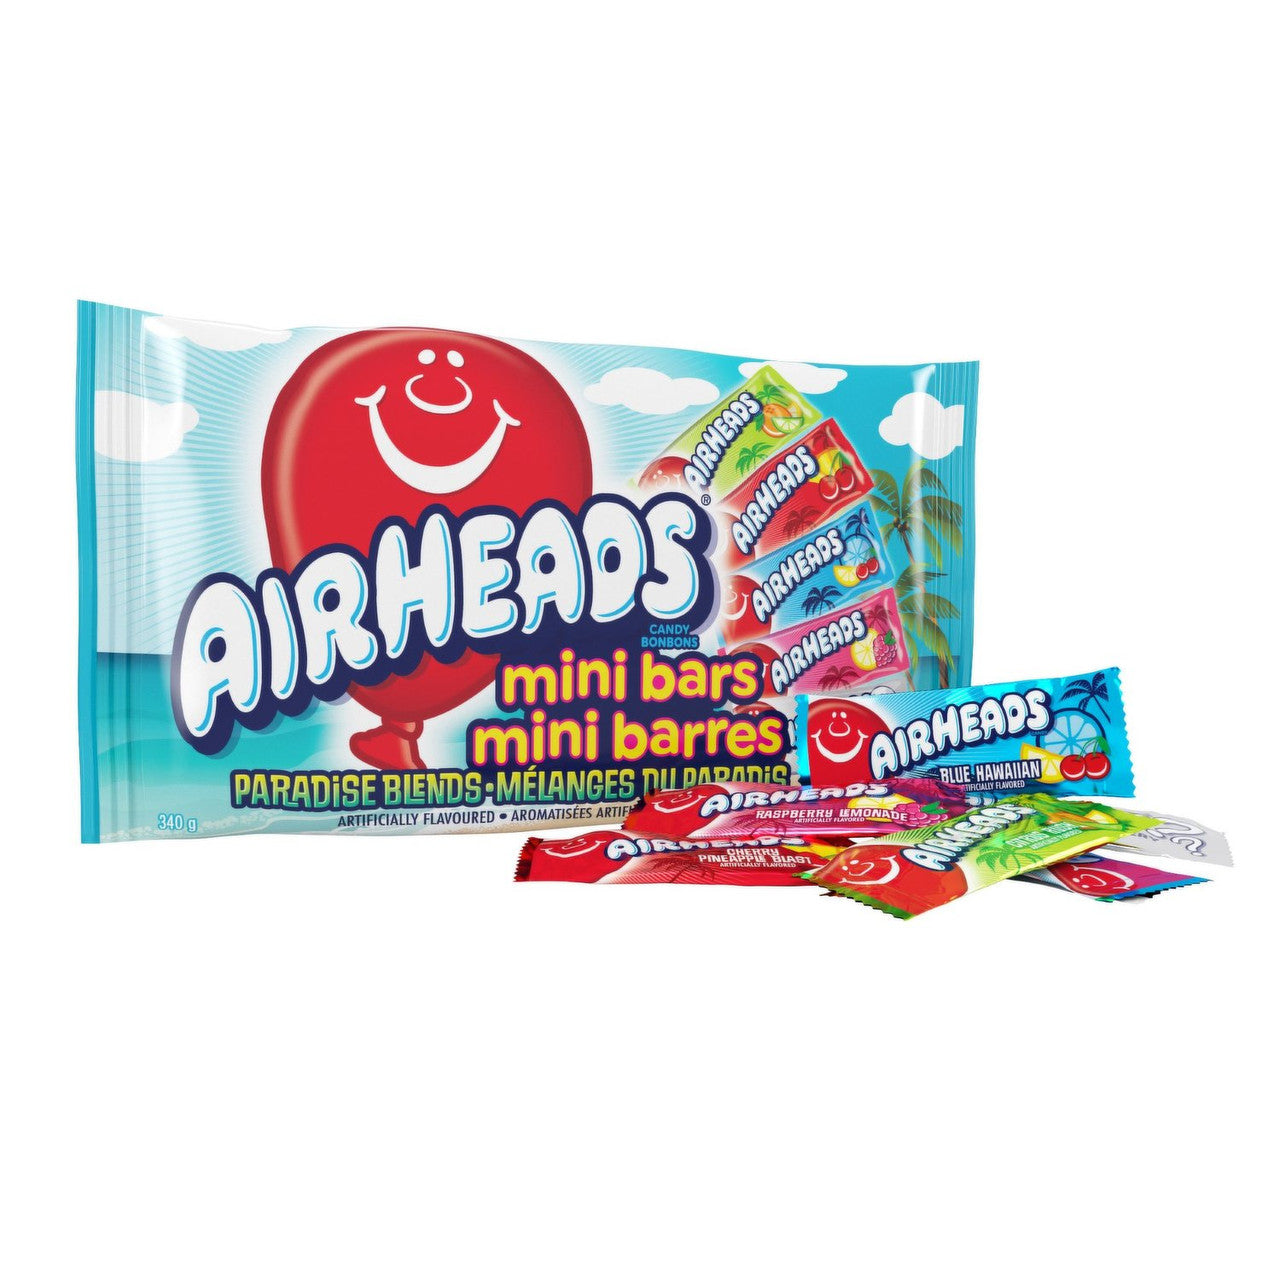 Airheads Candy Mini Bars, Paradise Blends, 340g/11.9 oz. Bag {Imported from Canada}